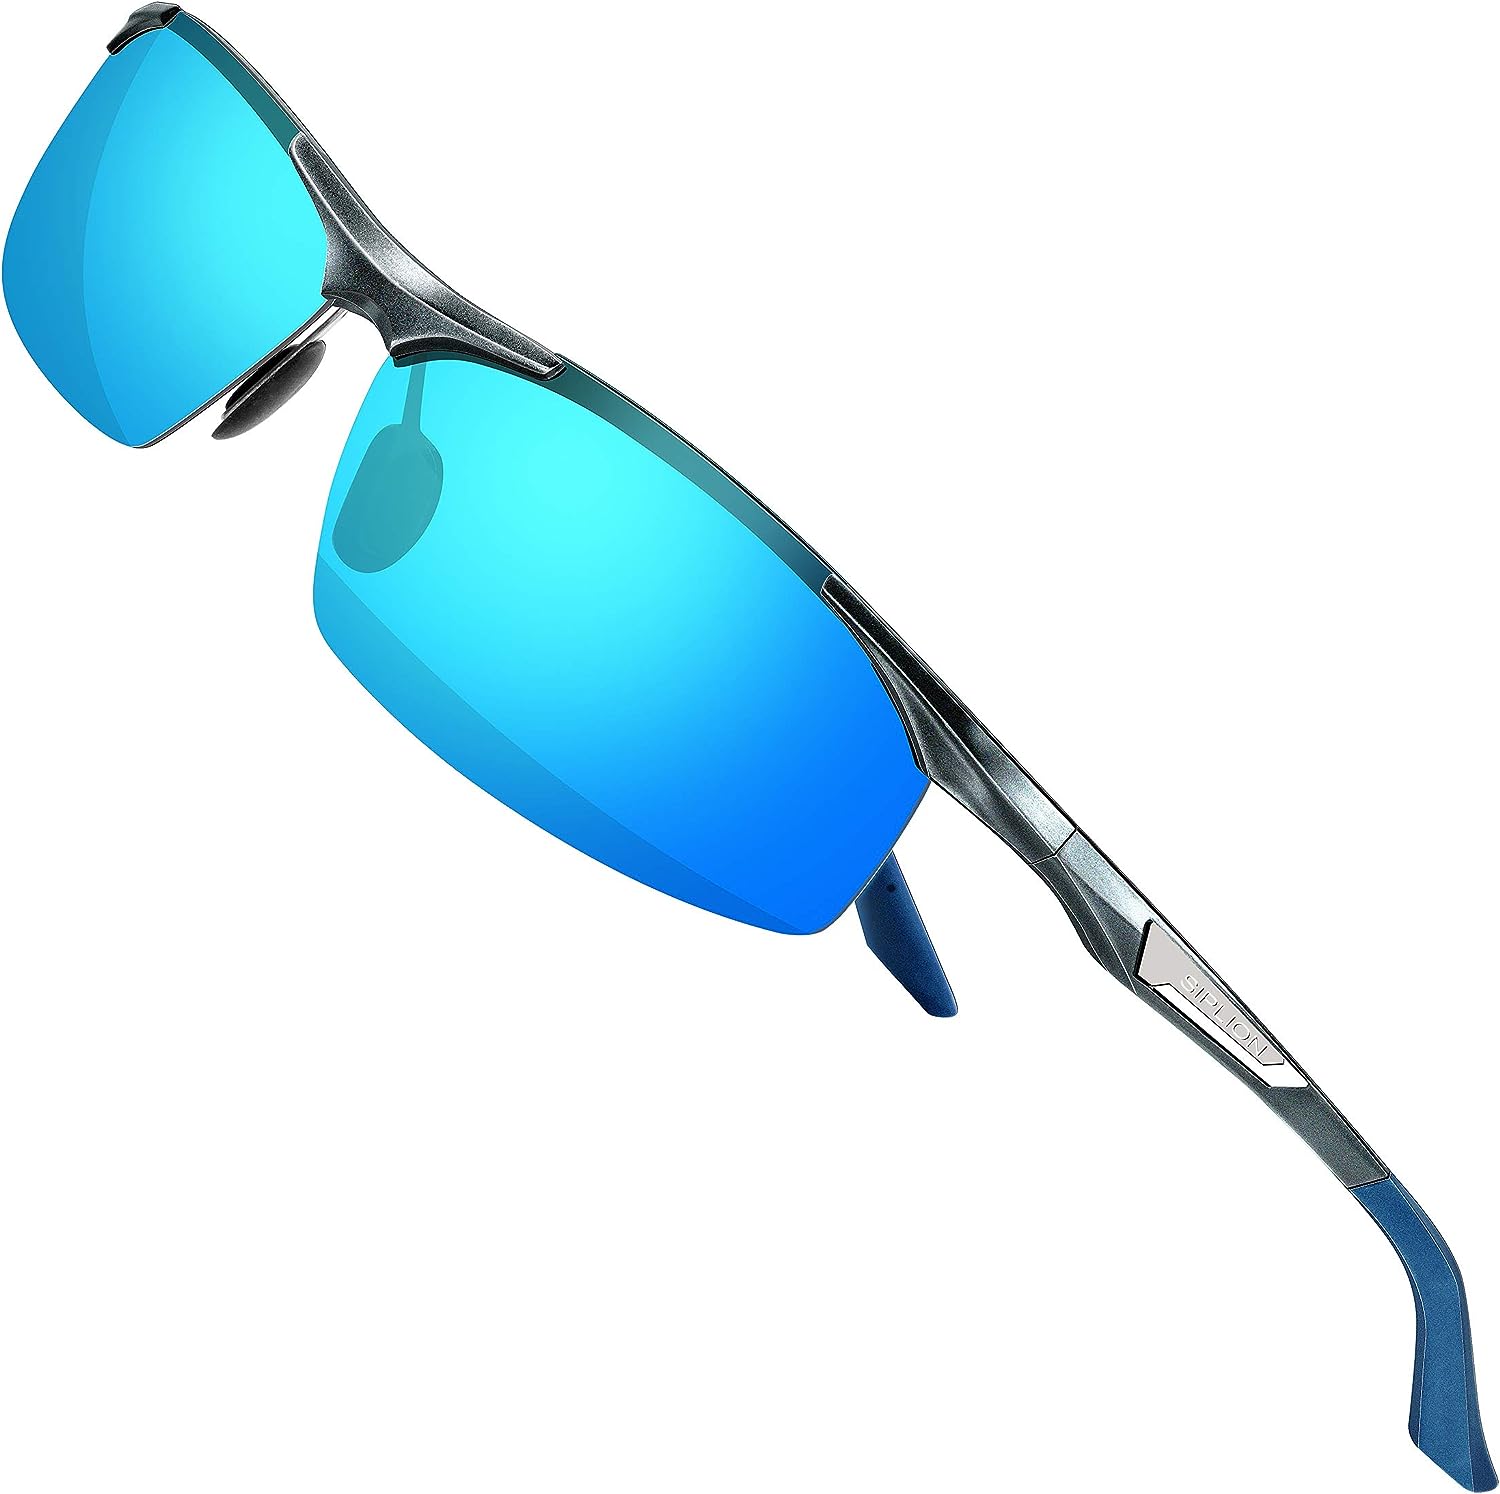 Men's Polarized Metal Sport Sunglasses for Fishing, Golf, and Driving